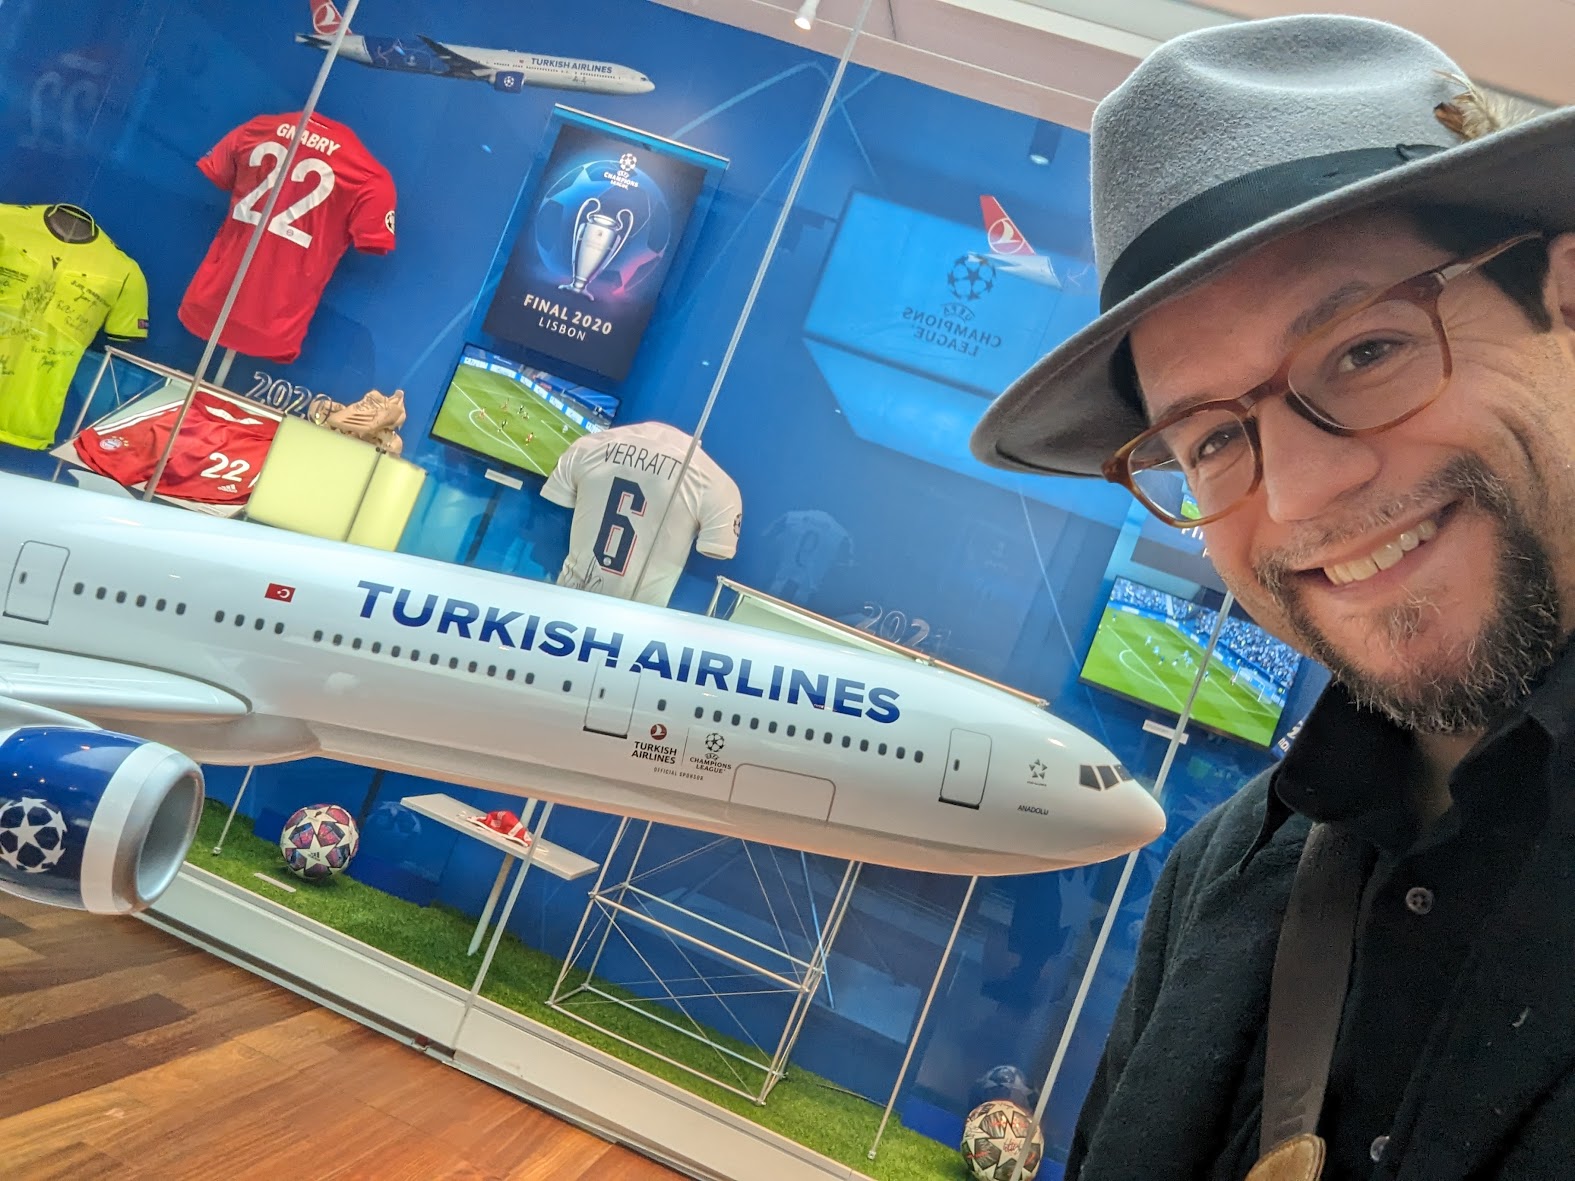 a man wearing a hat and glasses standing next to a model airplane